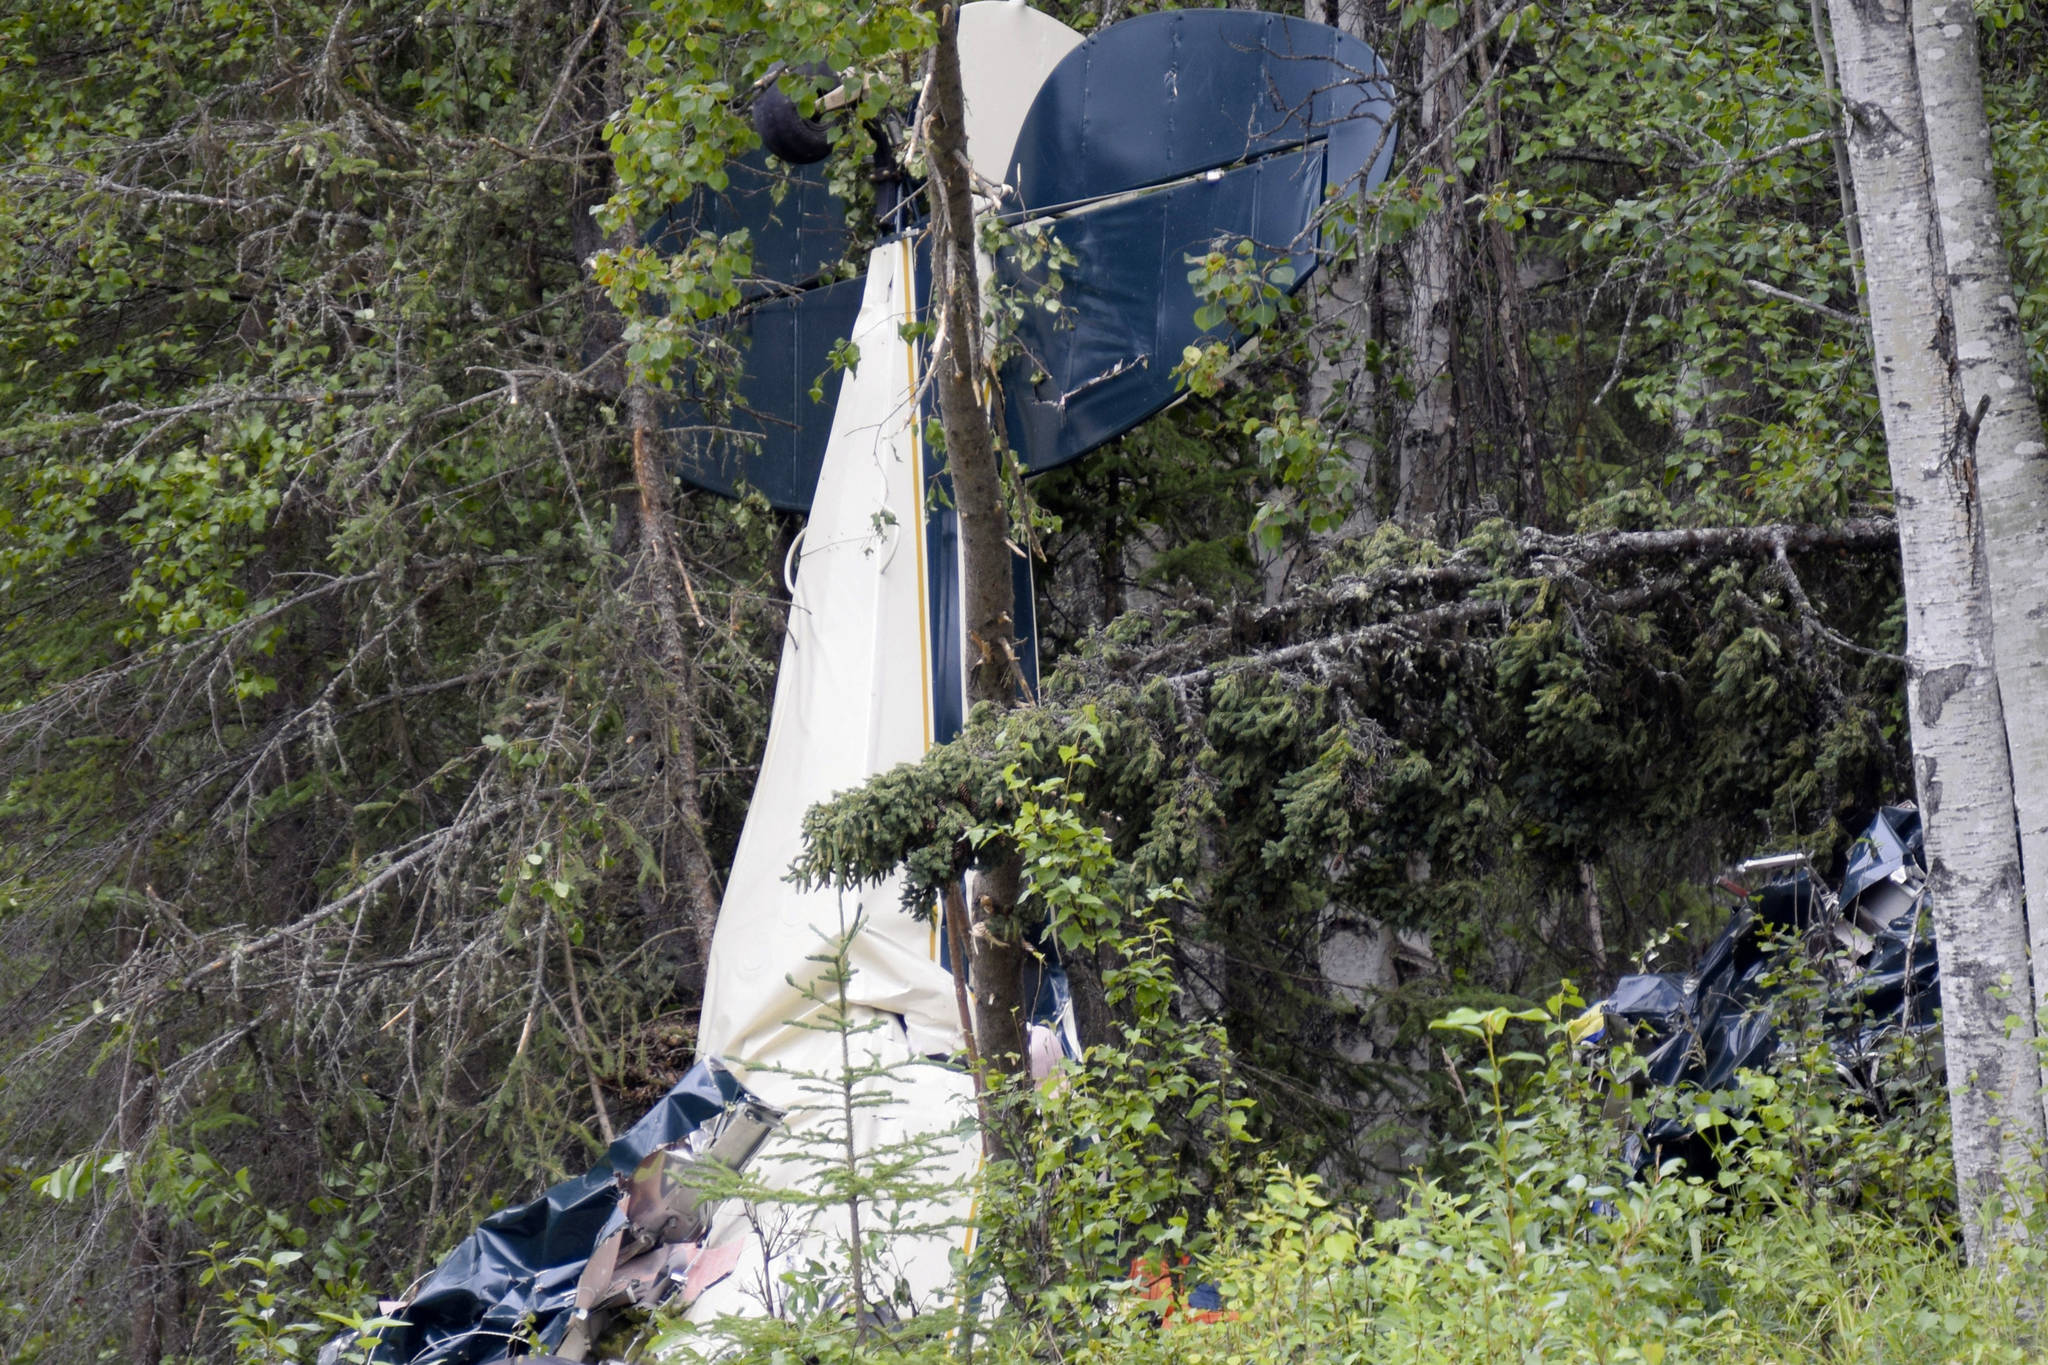 A plane rests in brush and trees after a midair collision outside of Soldotna, Alaska. State Rep. Gary Knopp, an Alaska state lawmaker, was involved in the July midair collision that killed seven people. (Jeff Helminiak / Peninsula Clarion)